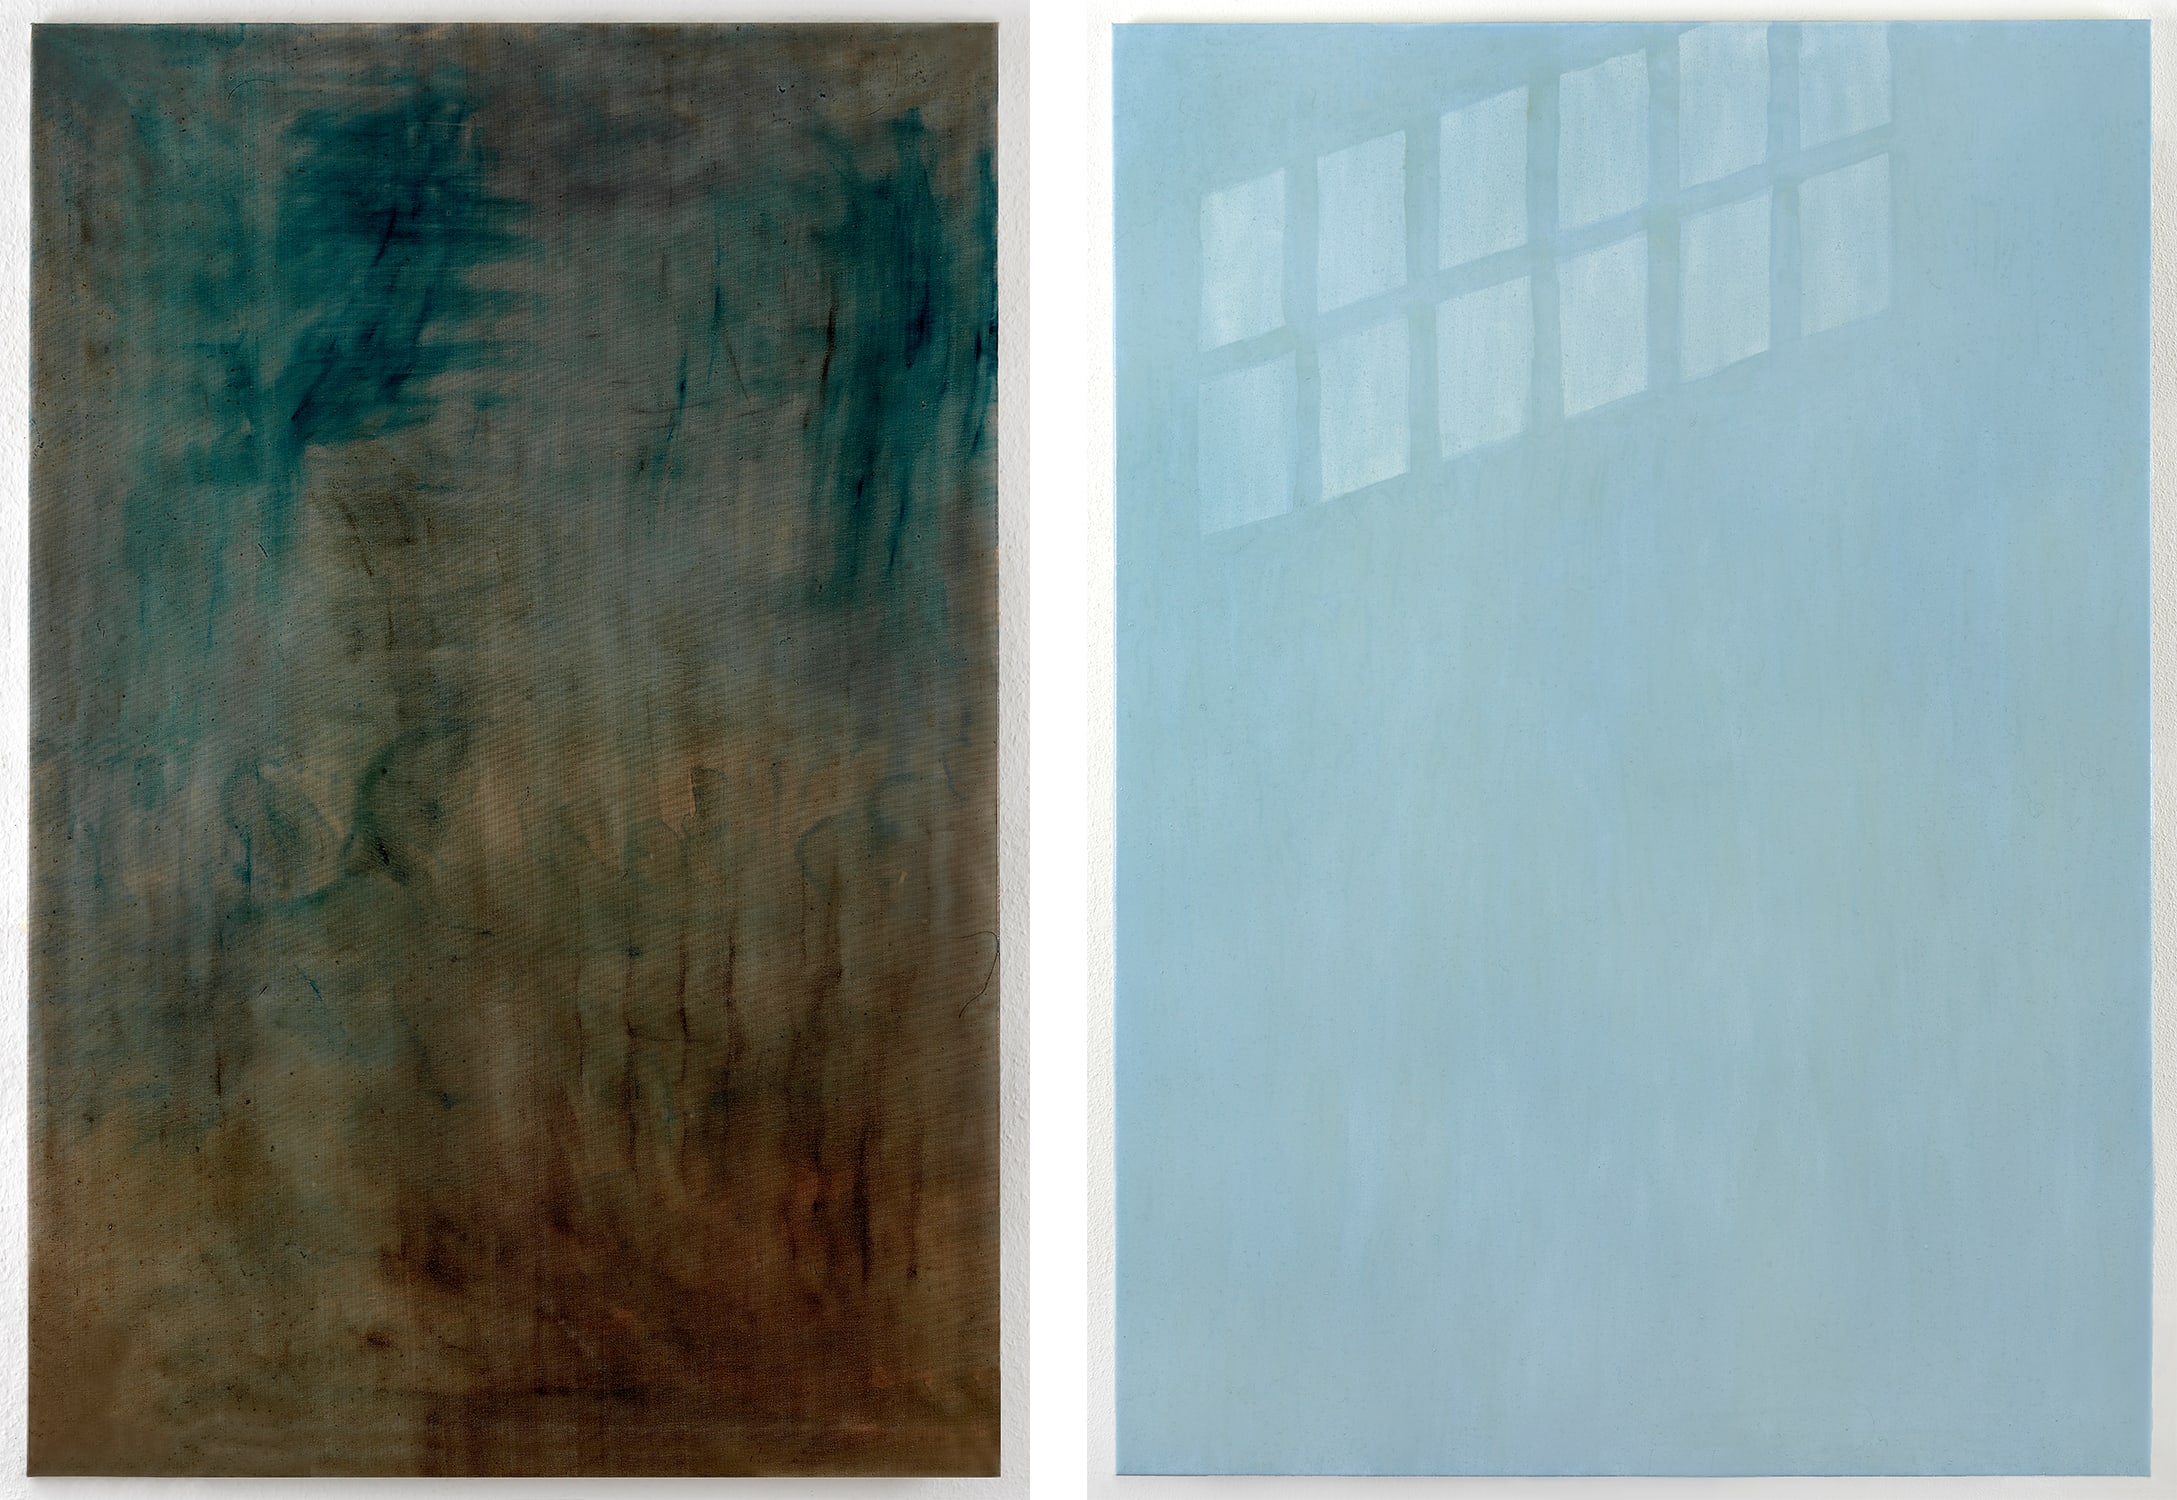 Left: Evelyn Taocheng Wang, Dutch Window No.7 / 4 Layers, 2020. Right: Evelyn Taocheng Wang, Dutch Window No.2 / 7 Layers, 2020. Courtesy of the artist and Antenna Space, Shanghai.